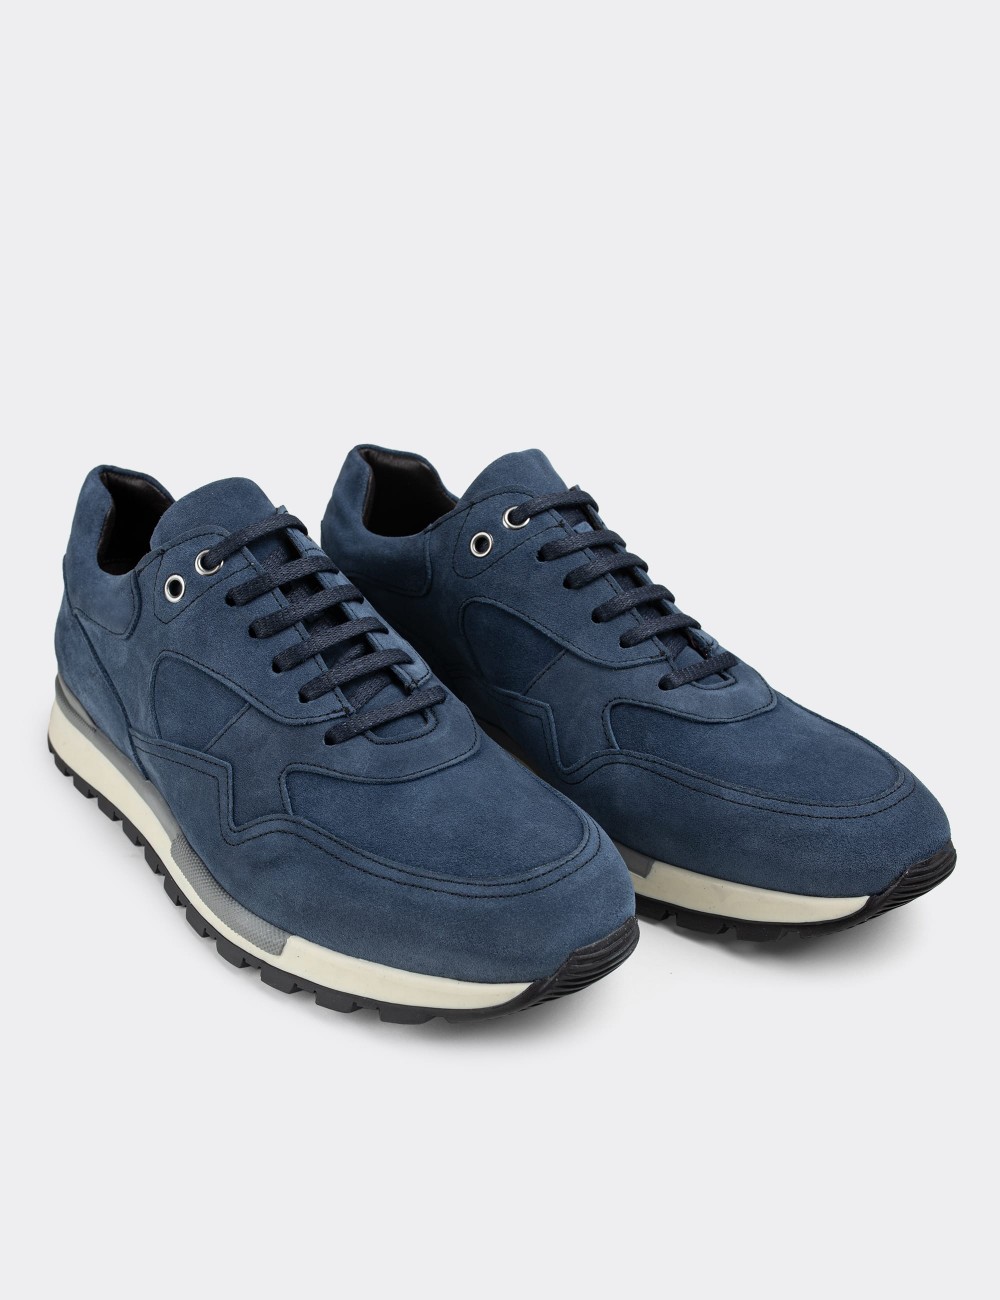 Blue Suede Leather Sneakers - 01818MMVIT01